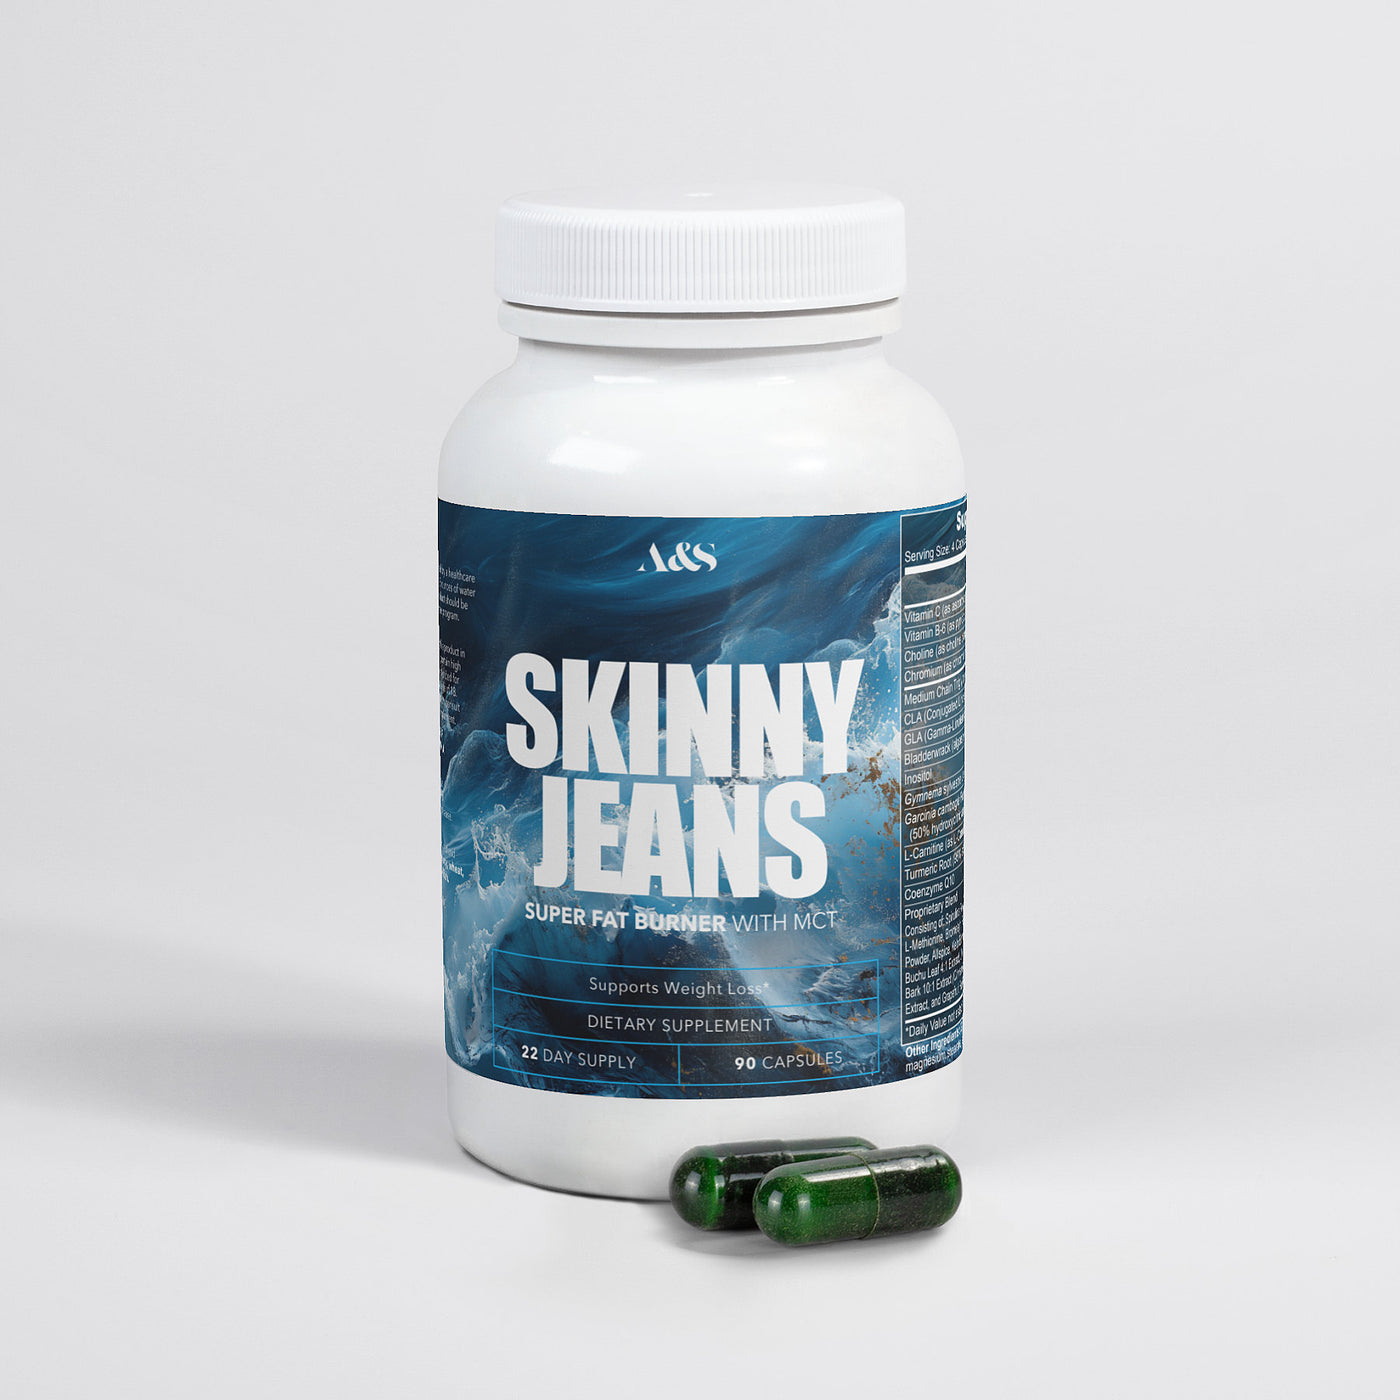 A&S Skinny Jeans - Super Fat Burner with MCT